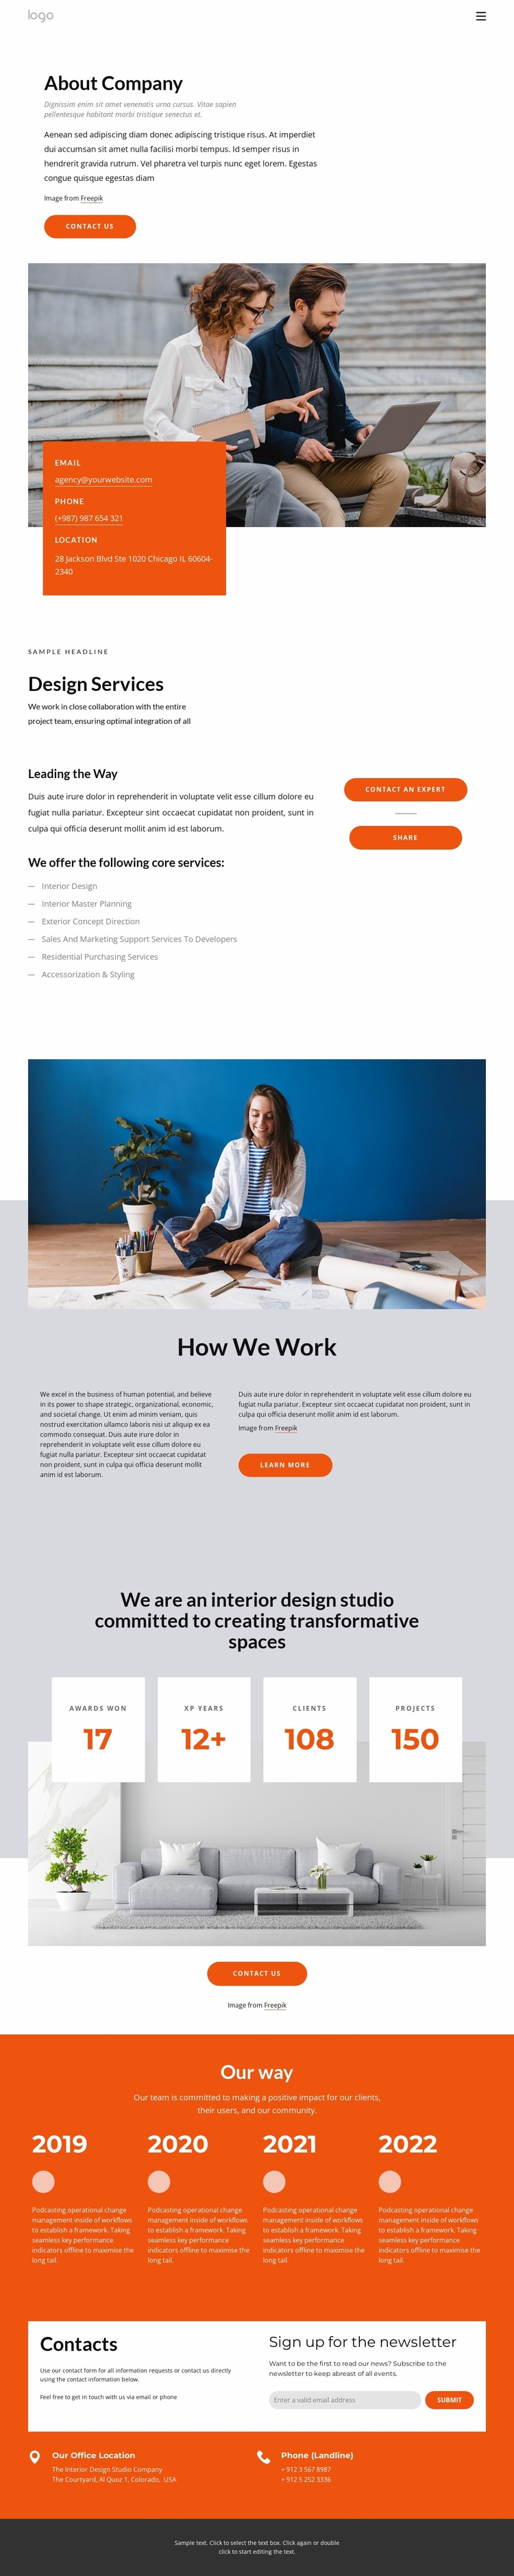 About family interior studio Landing Page